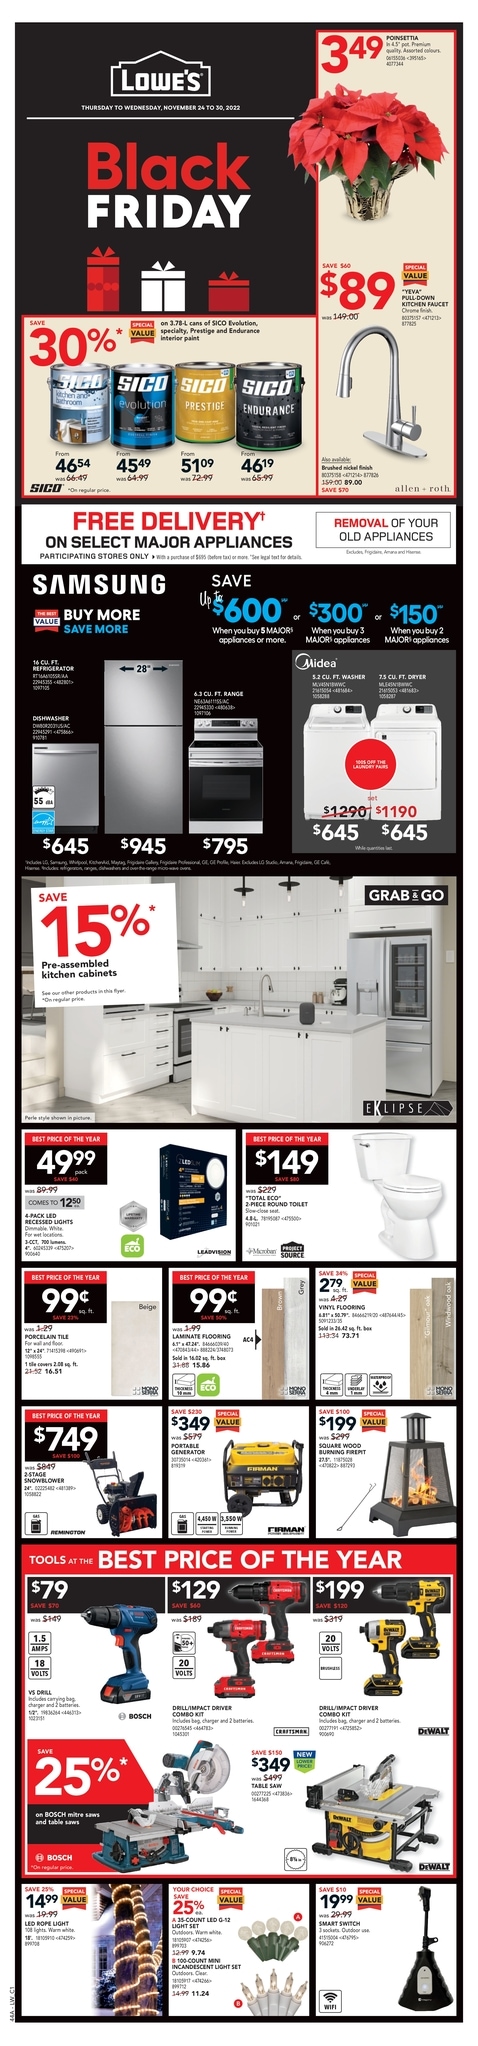 LOWE'S - Weekly Flyer Specials - Black Friday